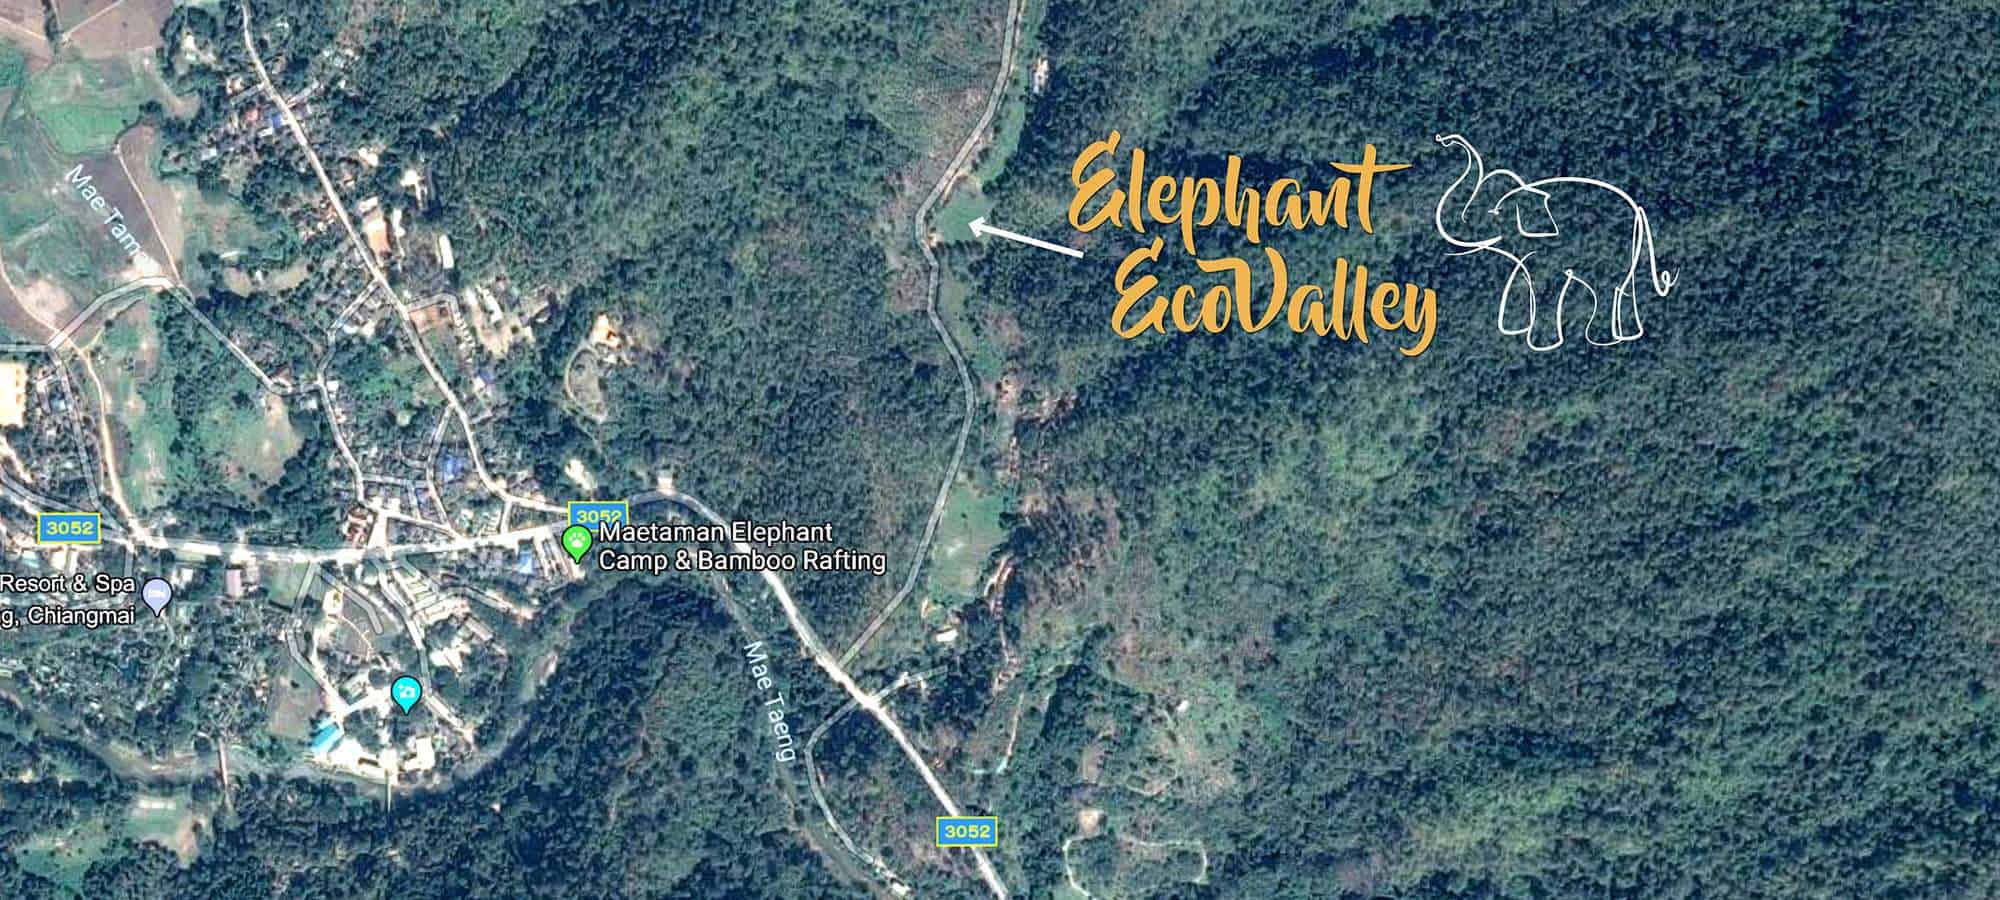 Your map to CONNECT WITH ELEPHANTS IN THAILAND at Eco-travel Elephant EcoValley!